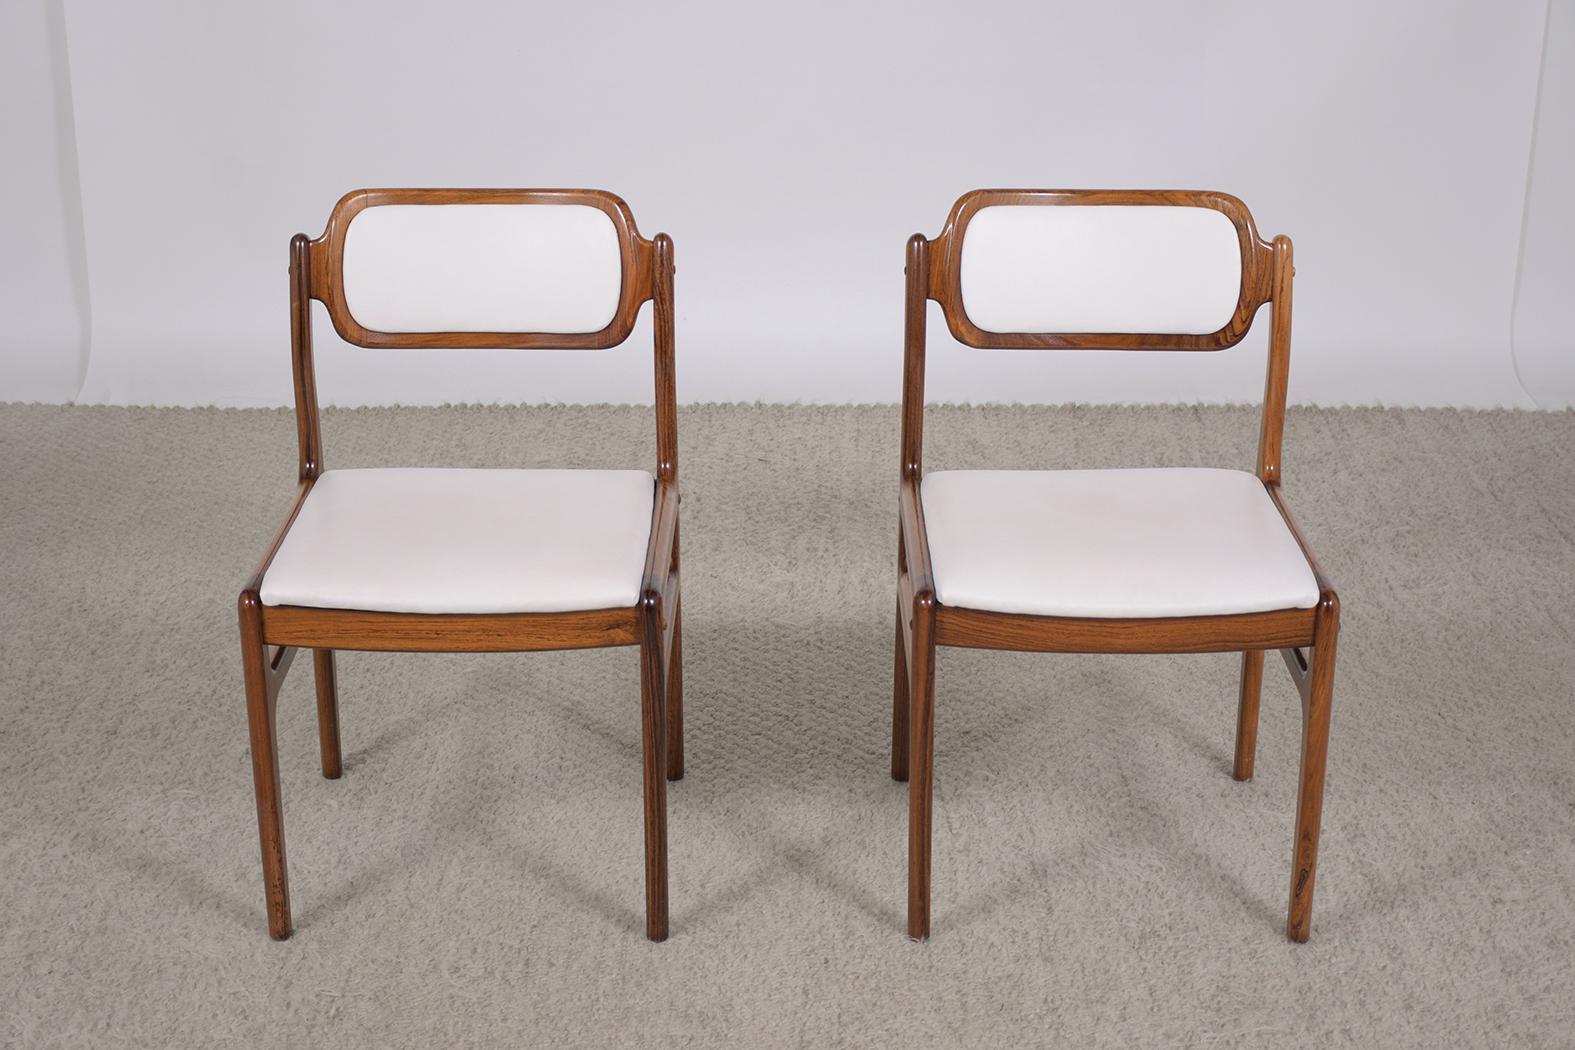 Hand-Crafted Set of Six Danish Modern Rosewood Dining Chairs